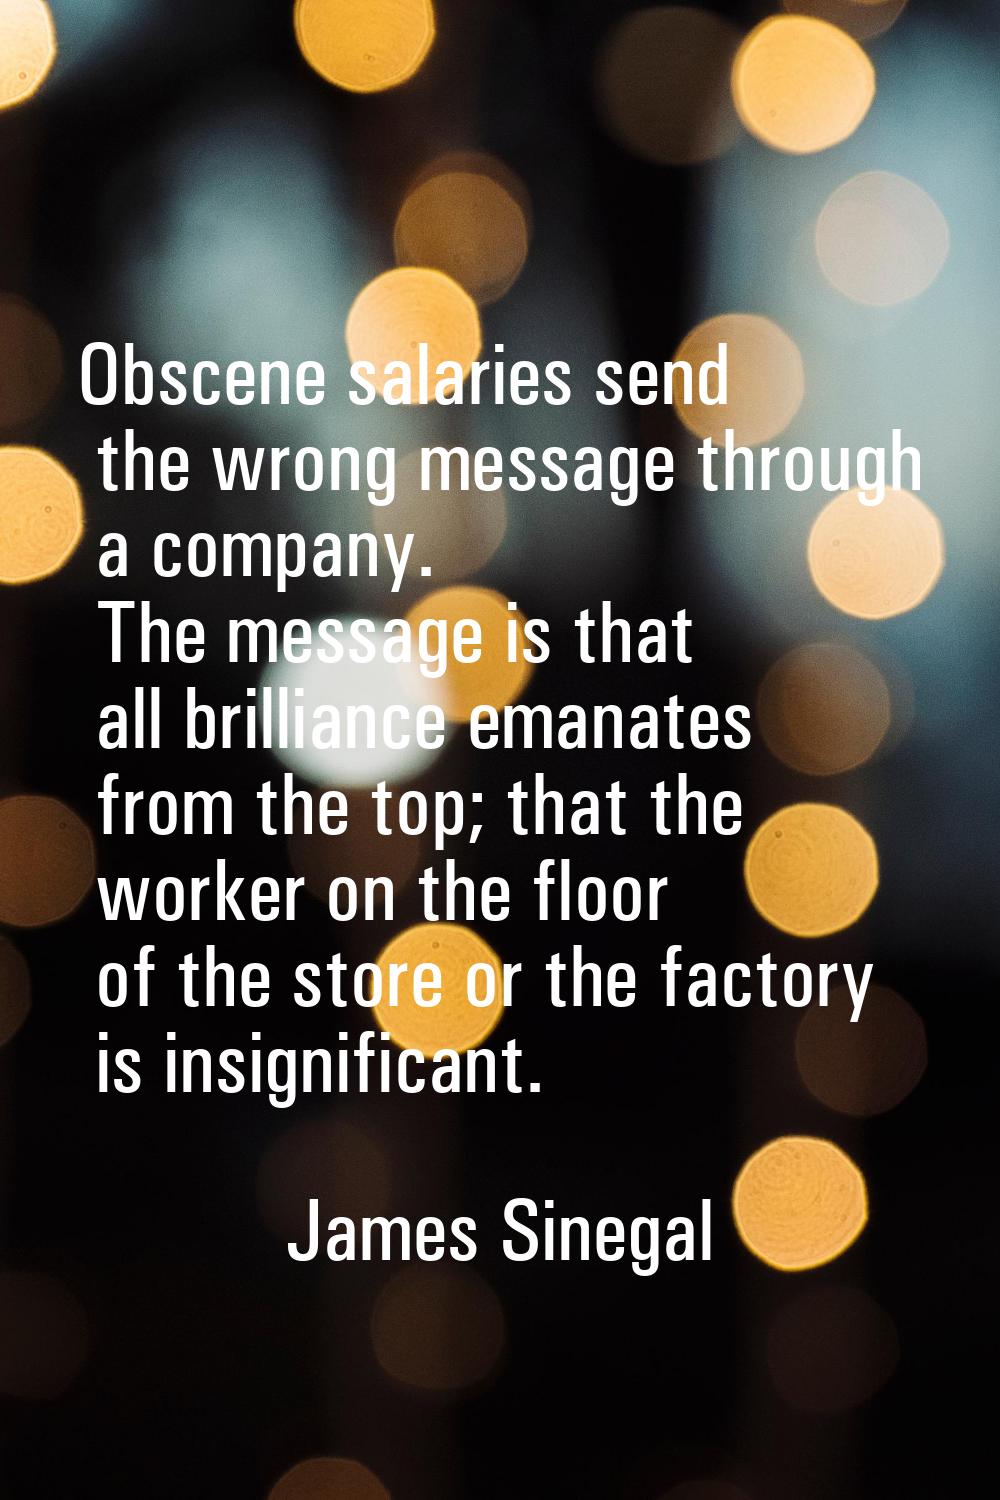 Obscene salaries send the wrong message through a company. The message is that all brilliance emana